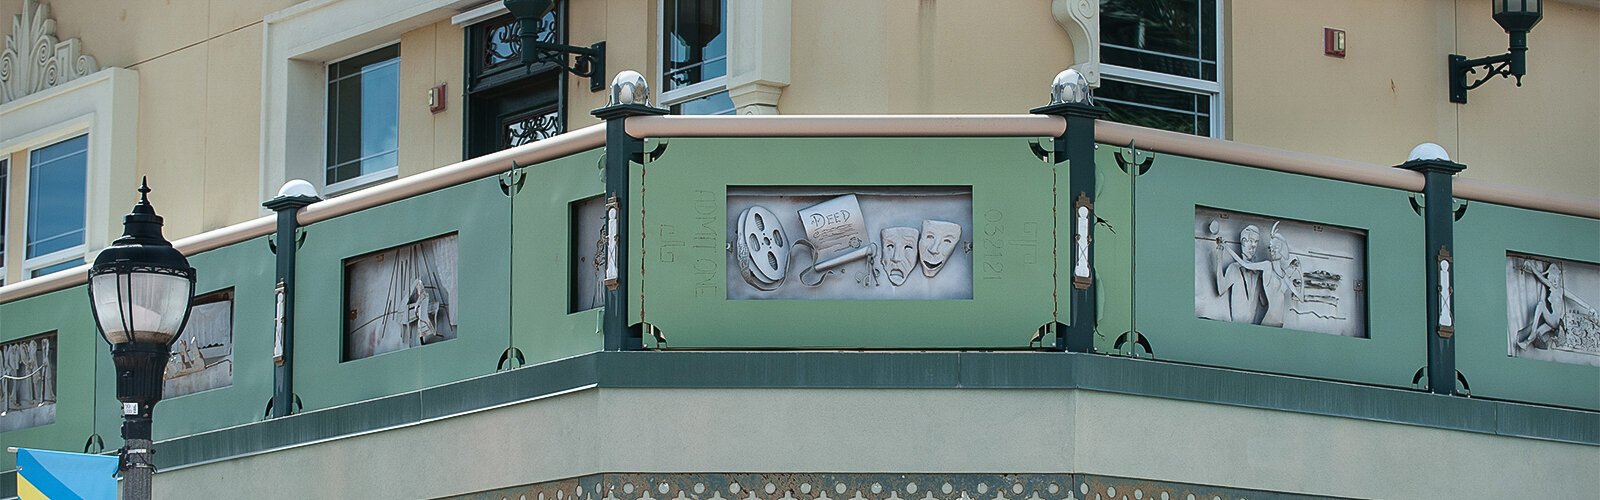 The stainless steel frieze “The Big Ticket” by artist Darin Evans on the exterior of the Capitol Theatre.